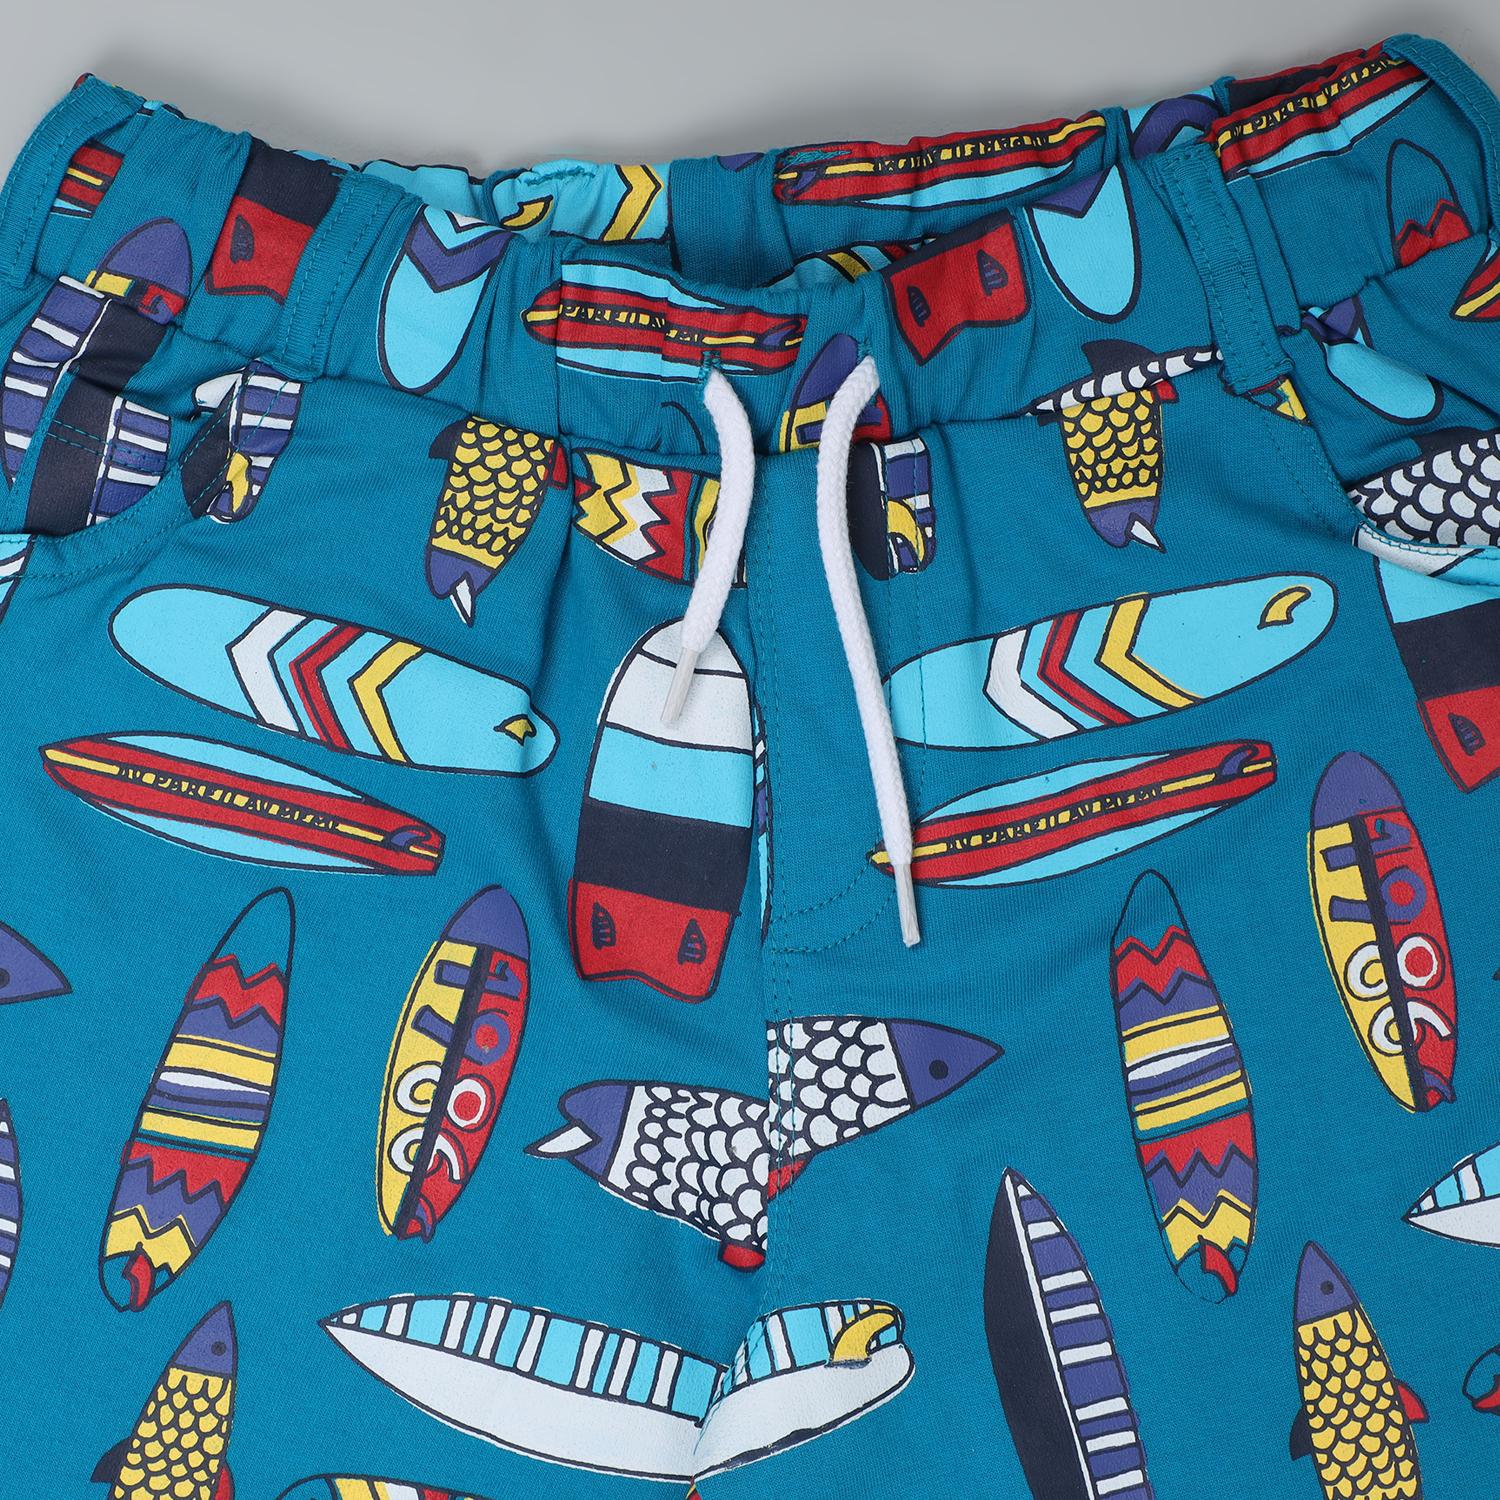 Combo of Boys Pattern Shorts-Turquoise & Green